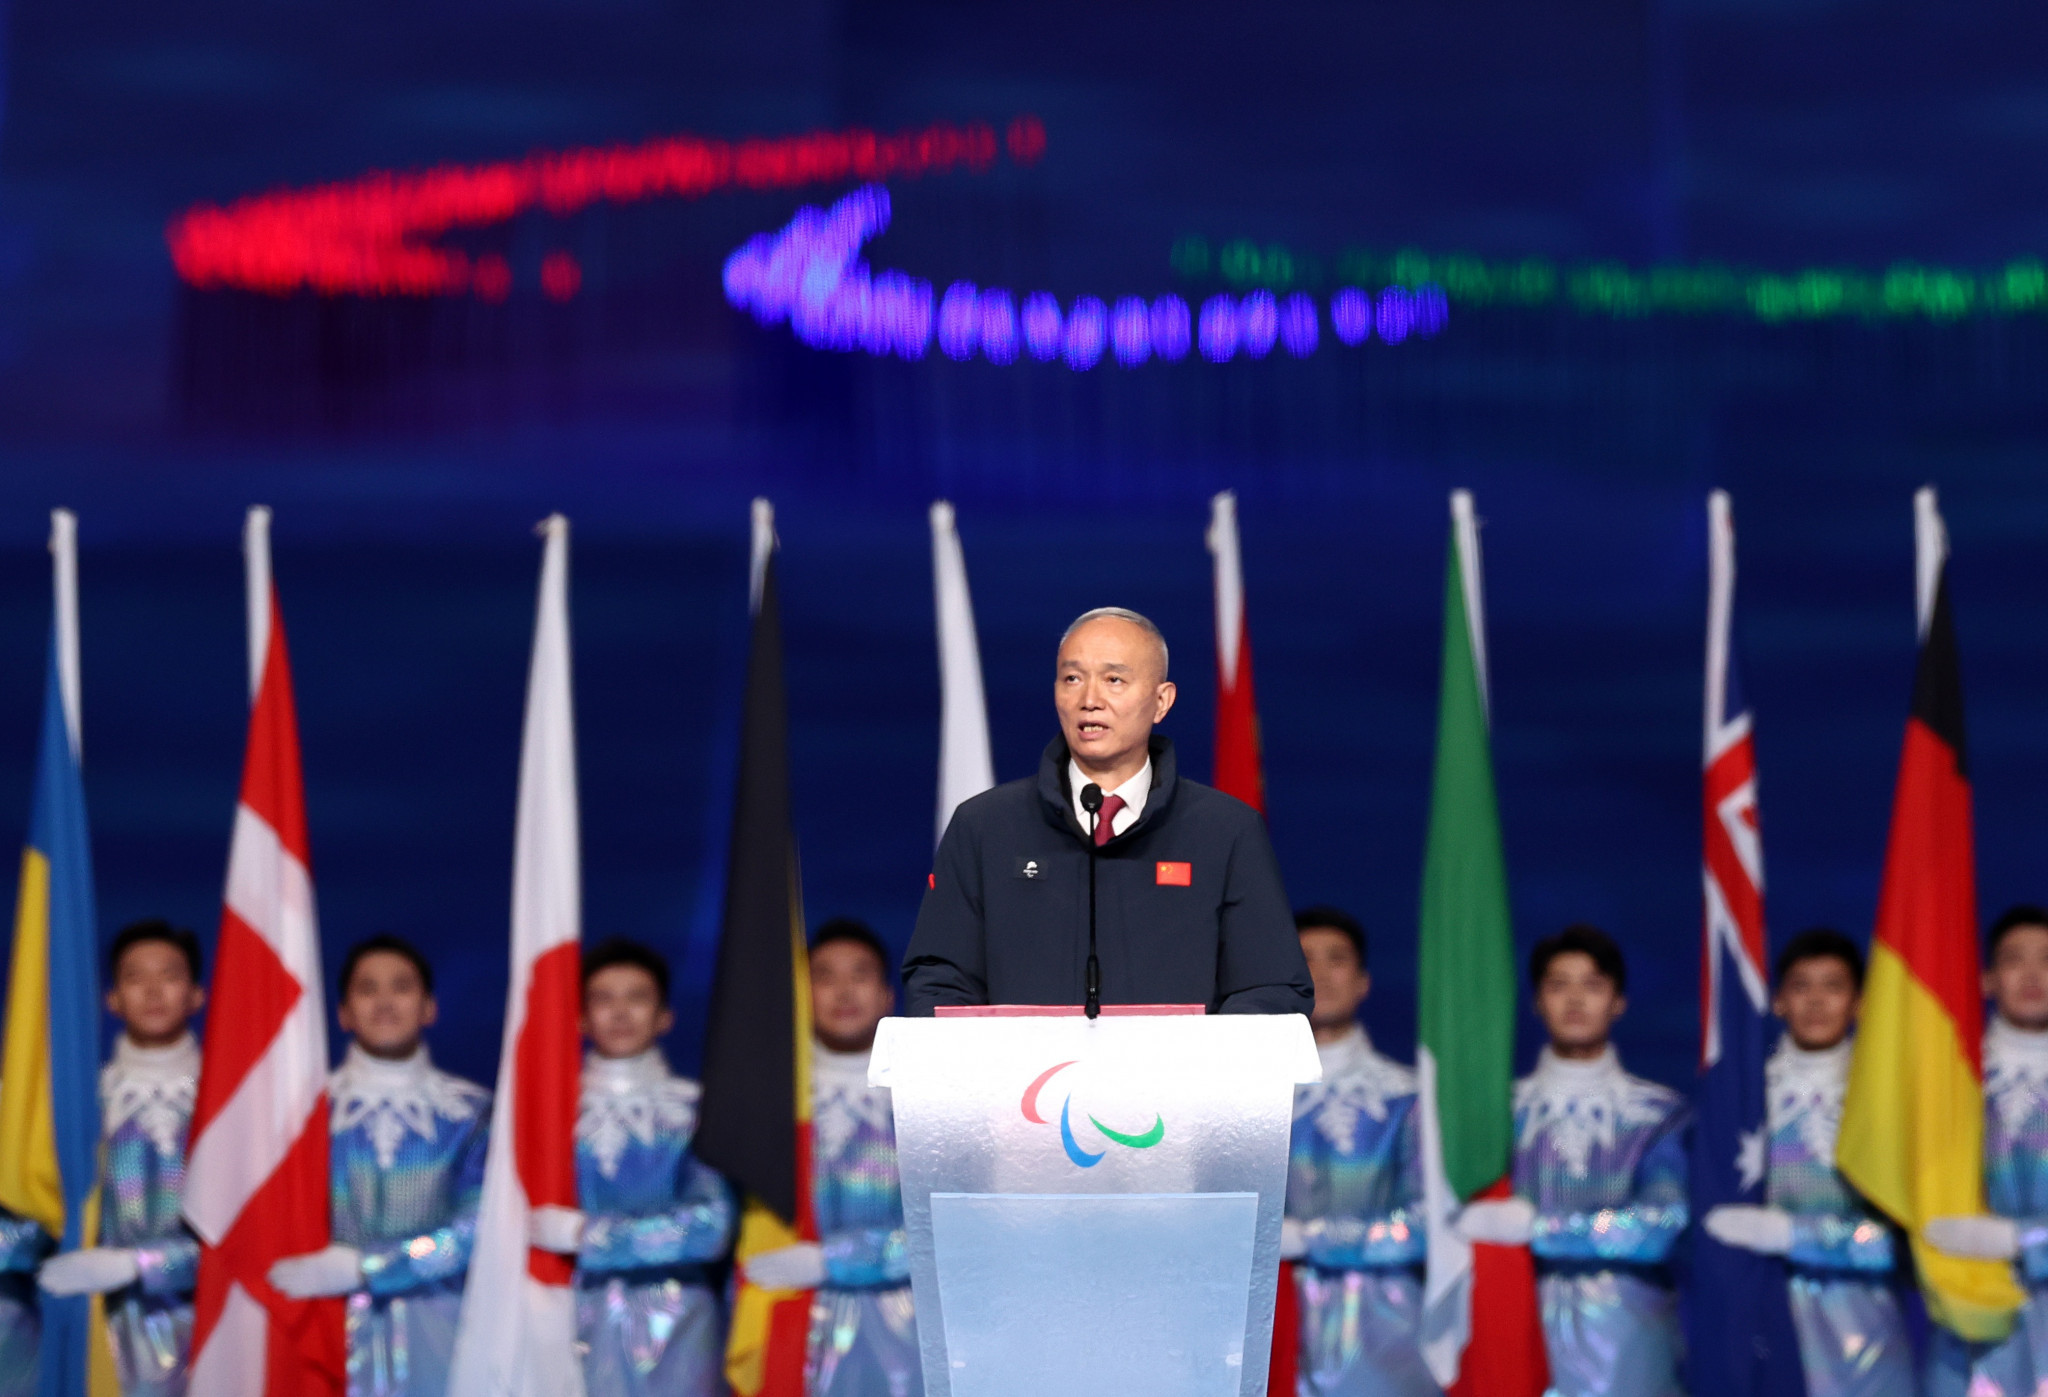 Beijing 2022 officials recognised by IPC for delivering "stunning" Paralympics